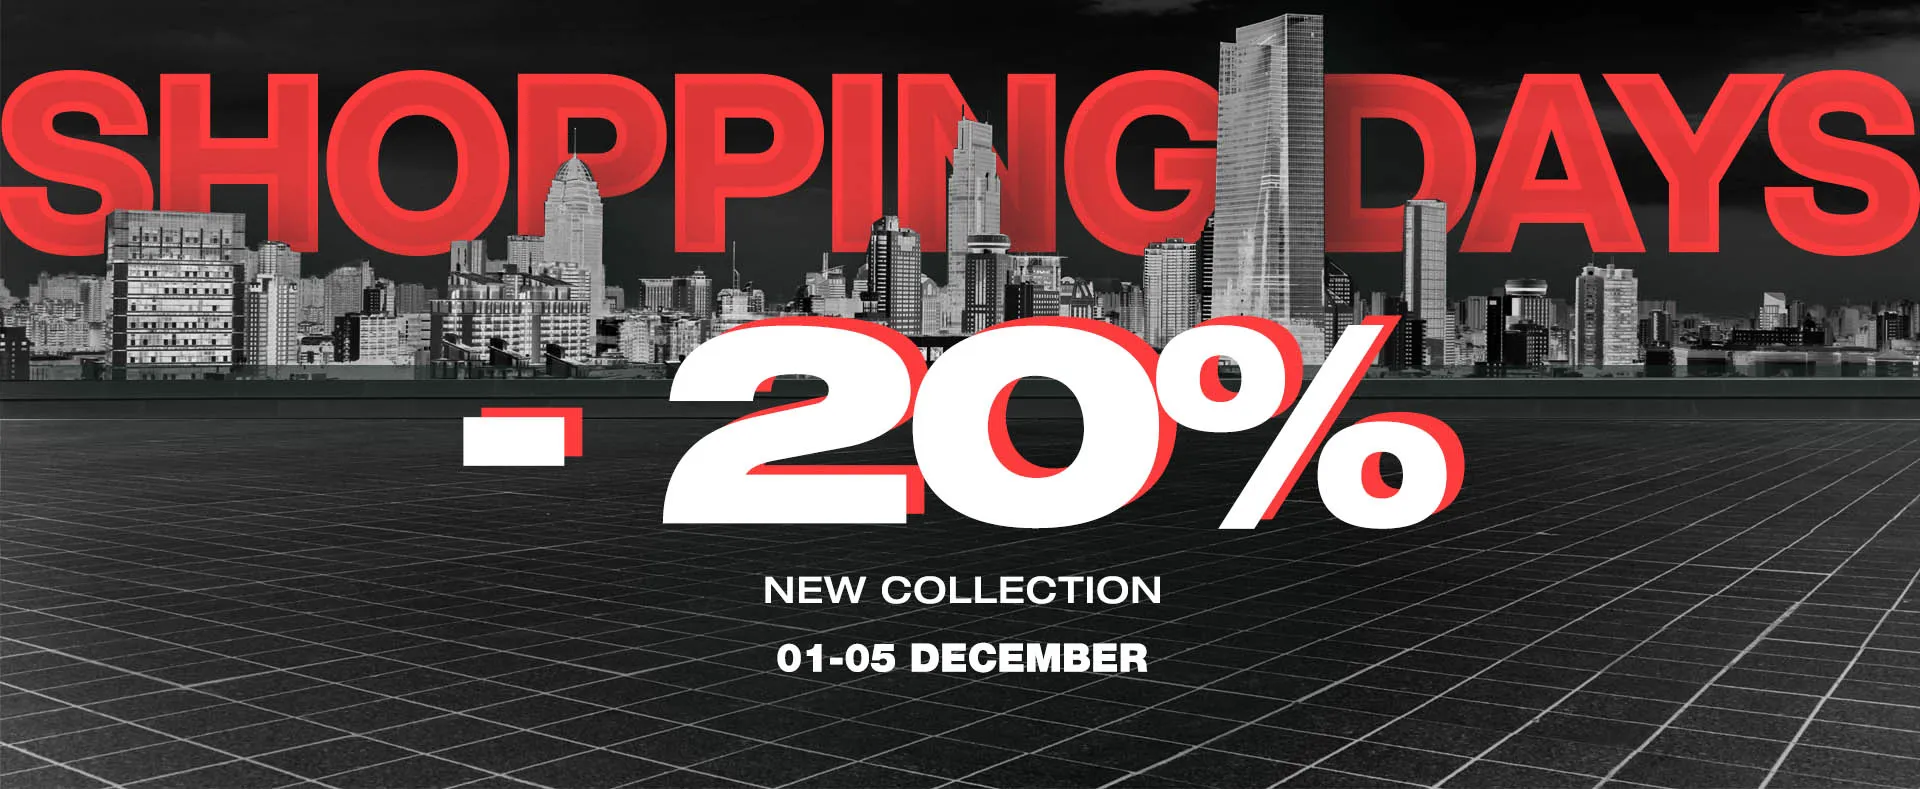 NEW COLLECTION -20%